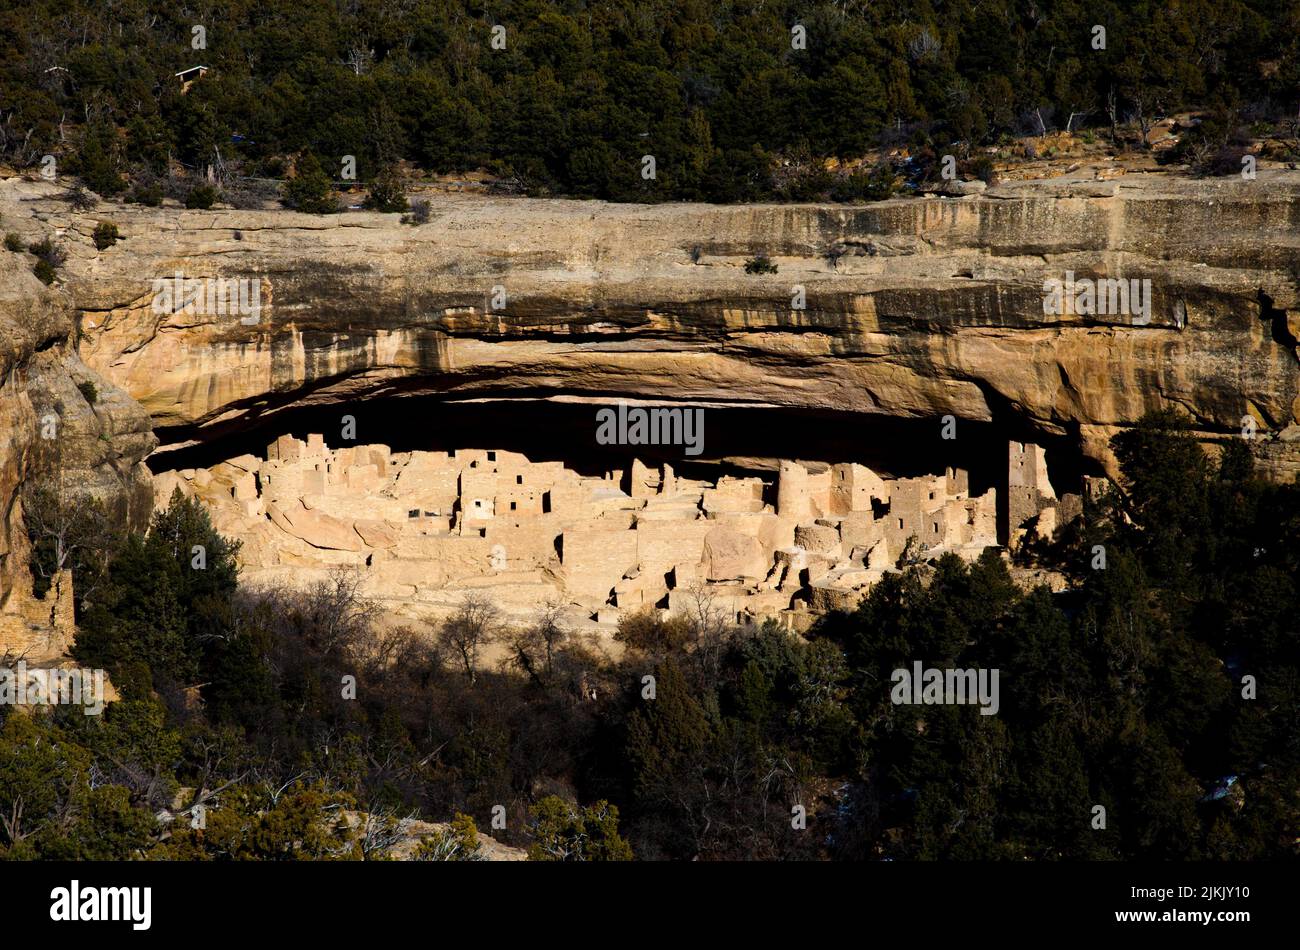 Cliff Palace view point overlooks cliff dweller ruins. Mesa Verde National Park Museum, Colorado Stock Photo